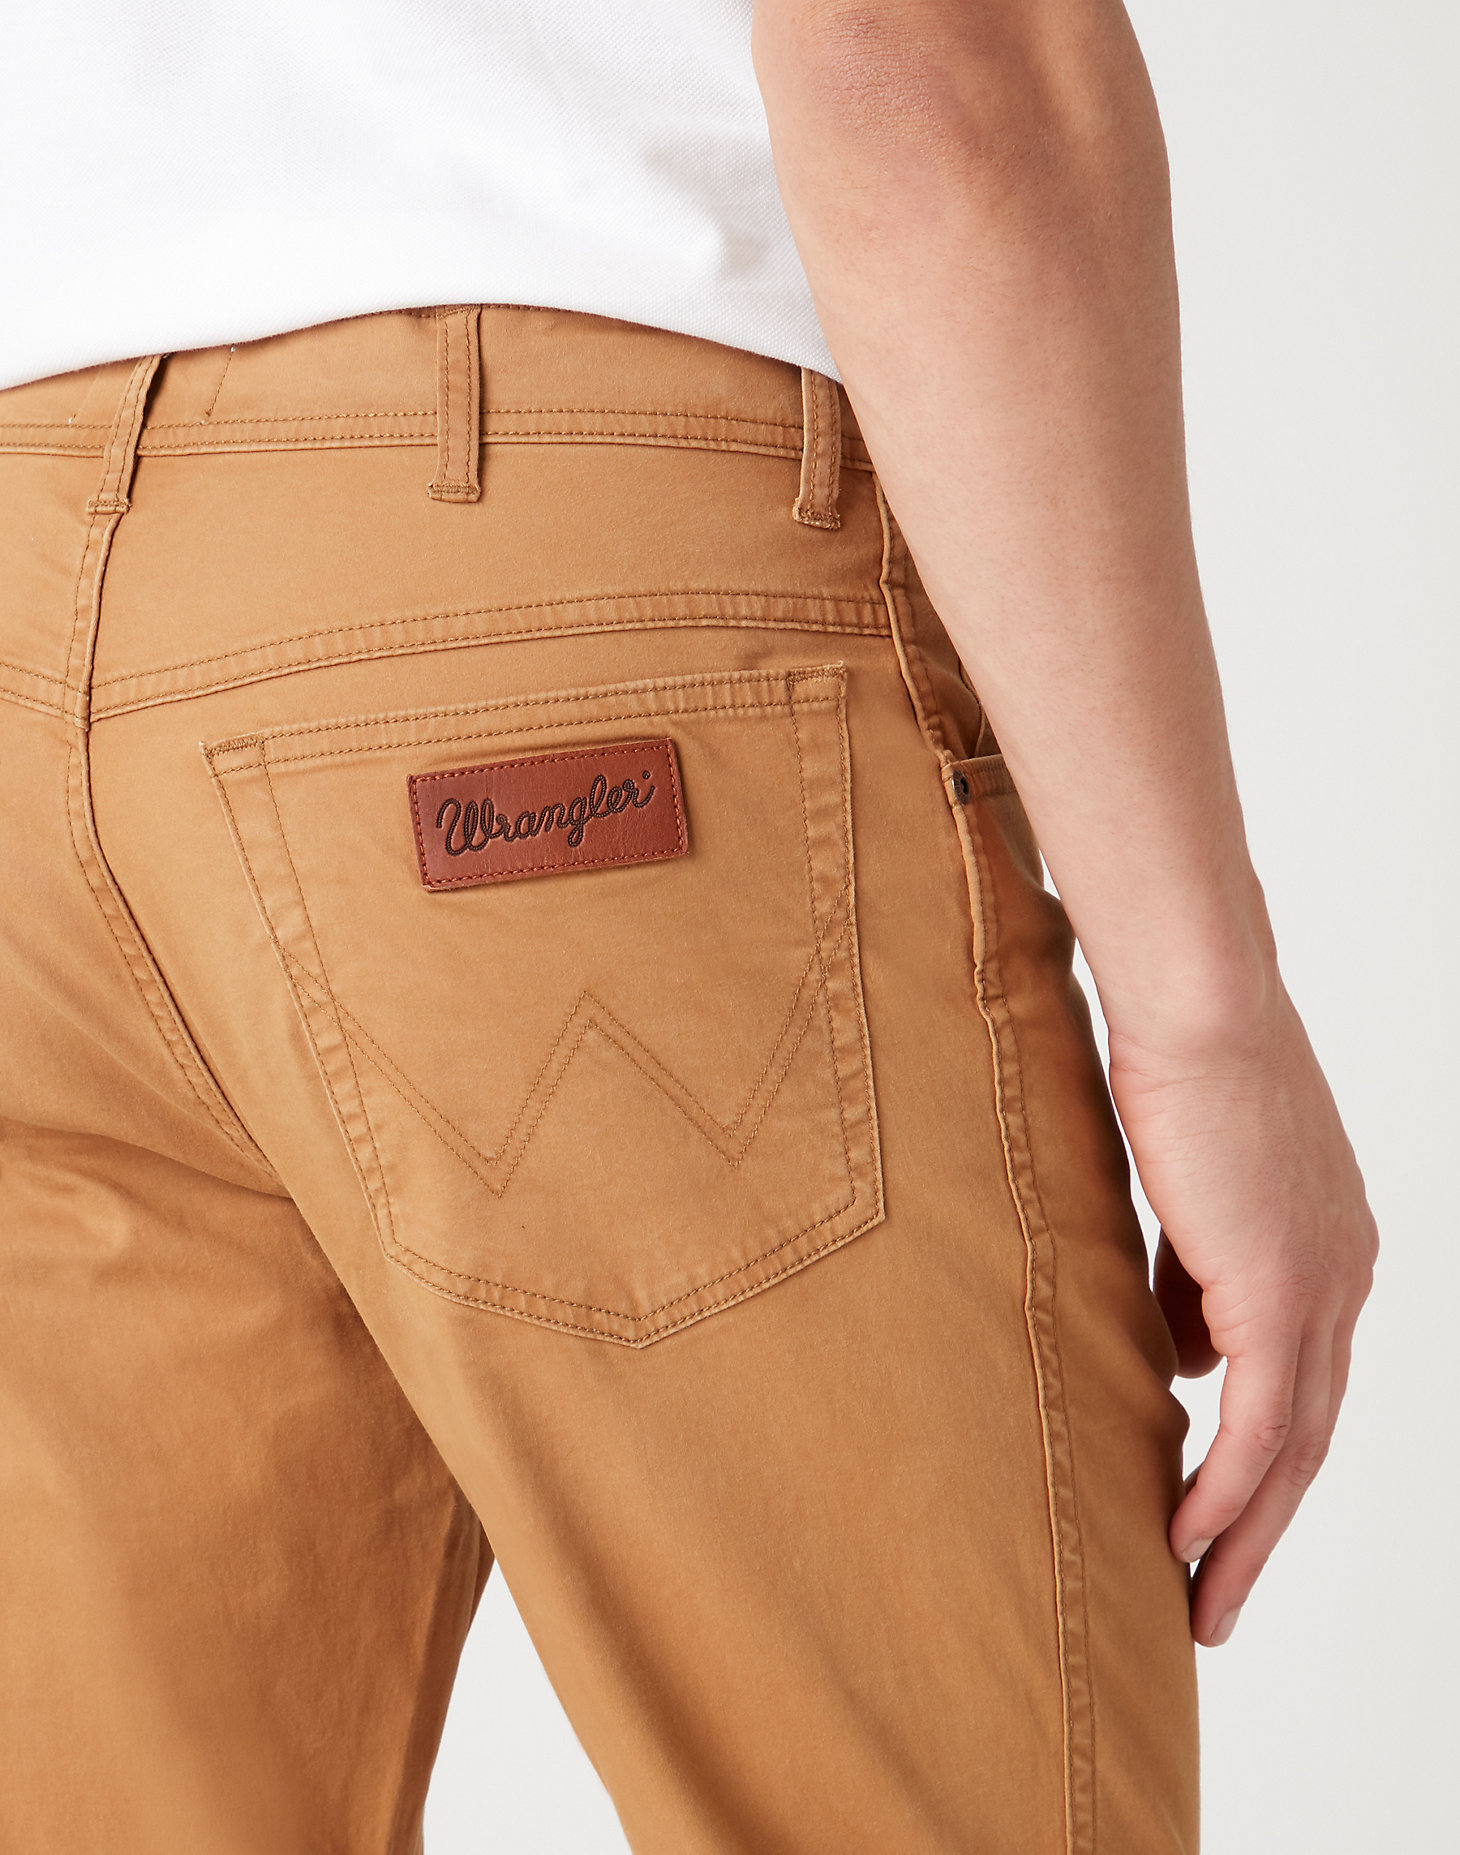 Texas Slim Trousers in Biscuit alternative view 3